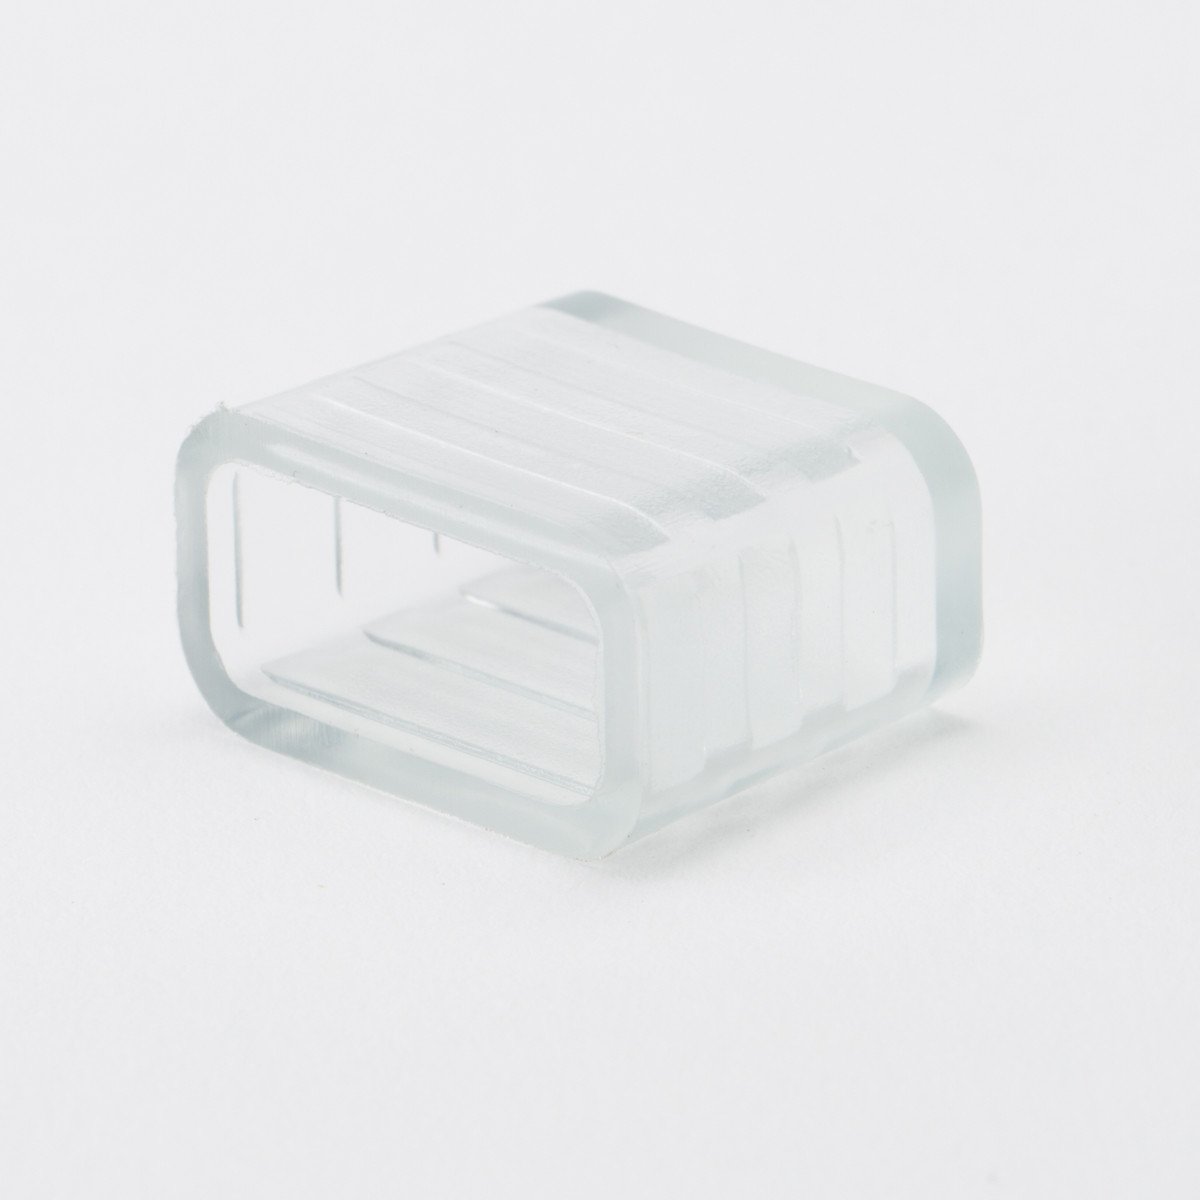 rectangular clear silicone strip light led end cap